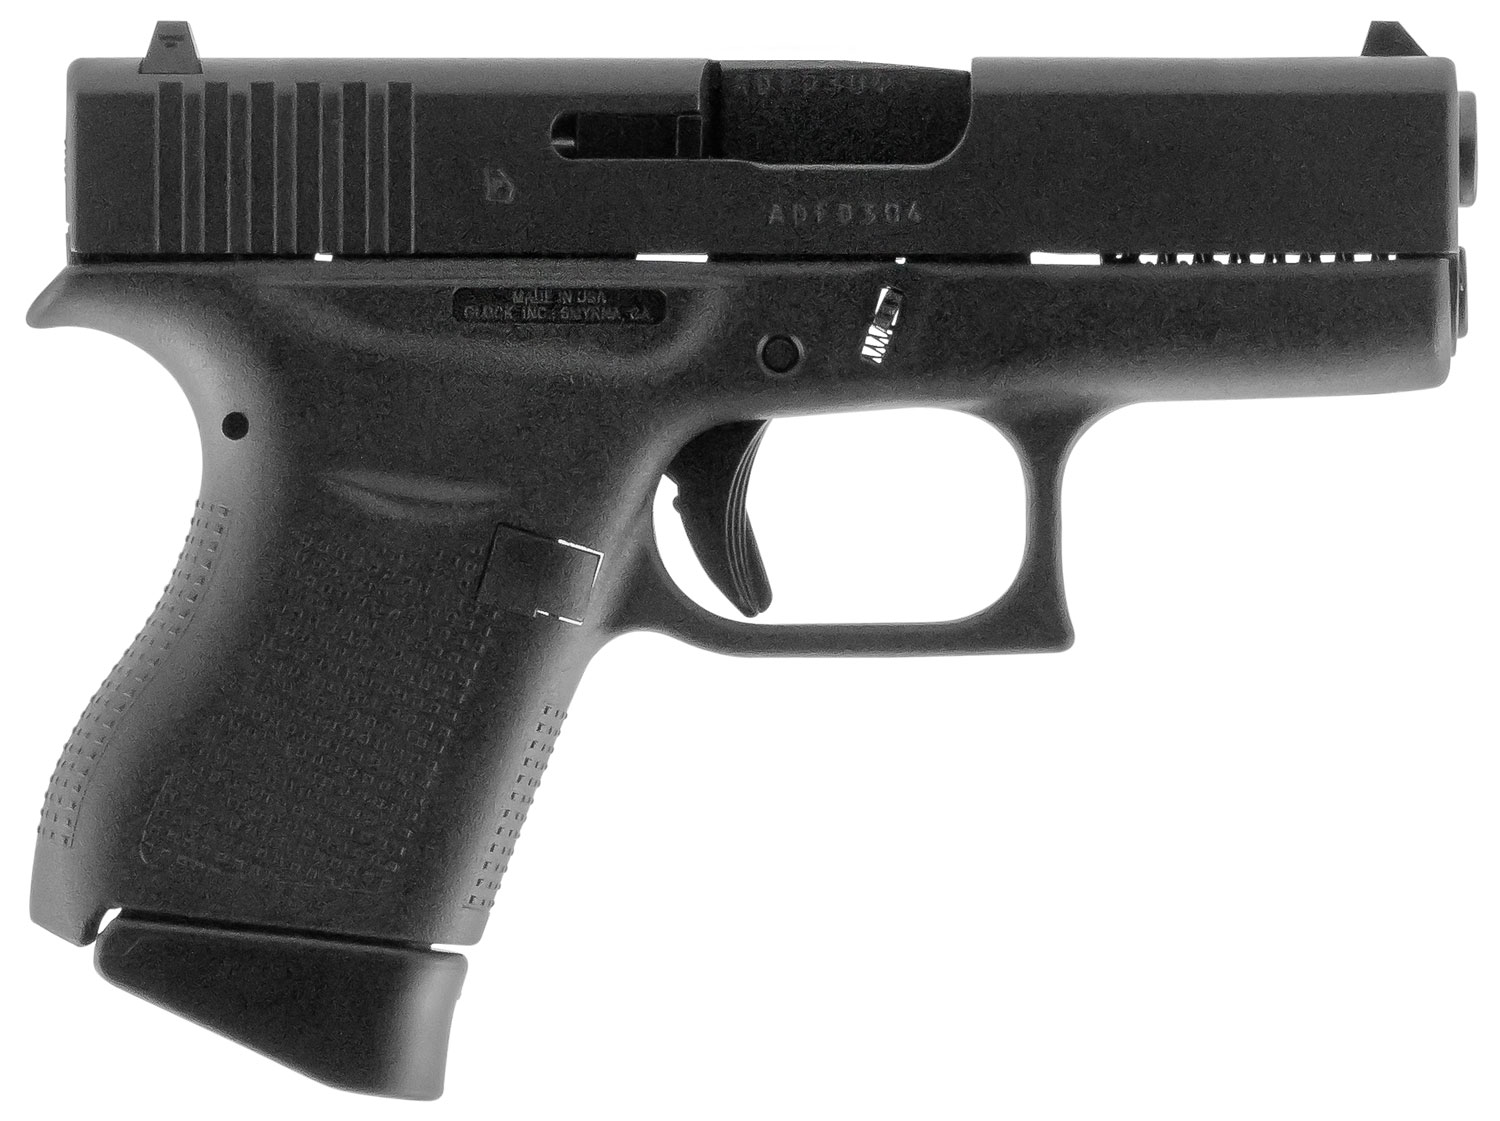 Glock UI4350201 G43 Subcompact 9mm Luger 3.41